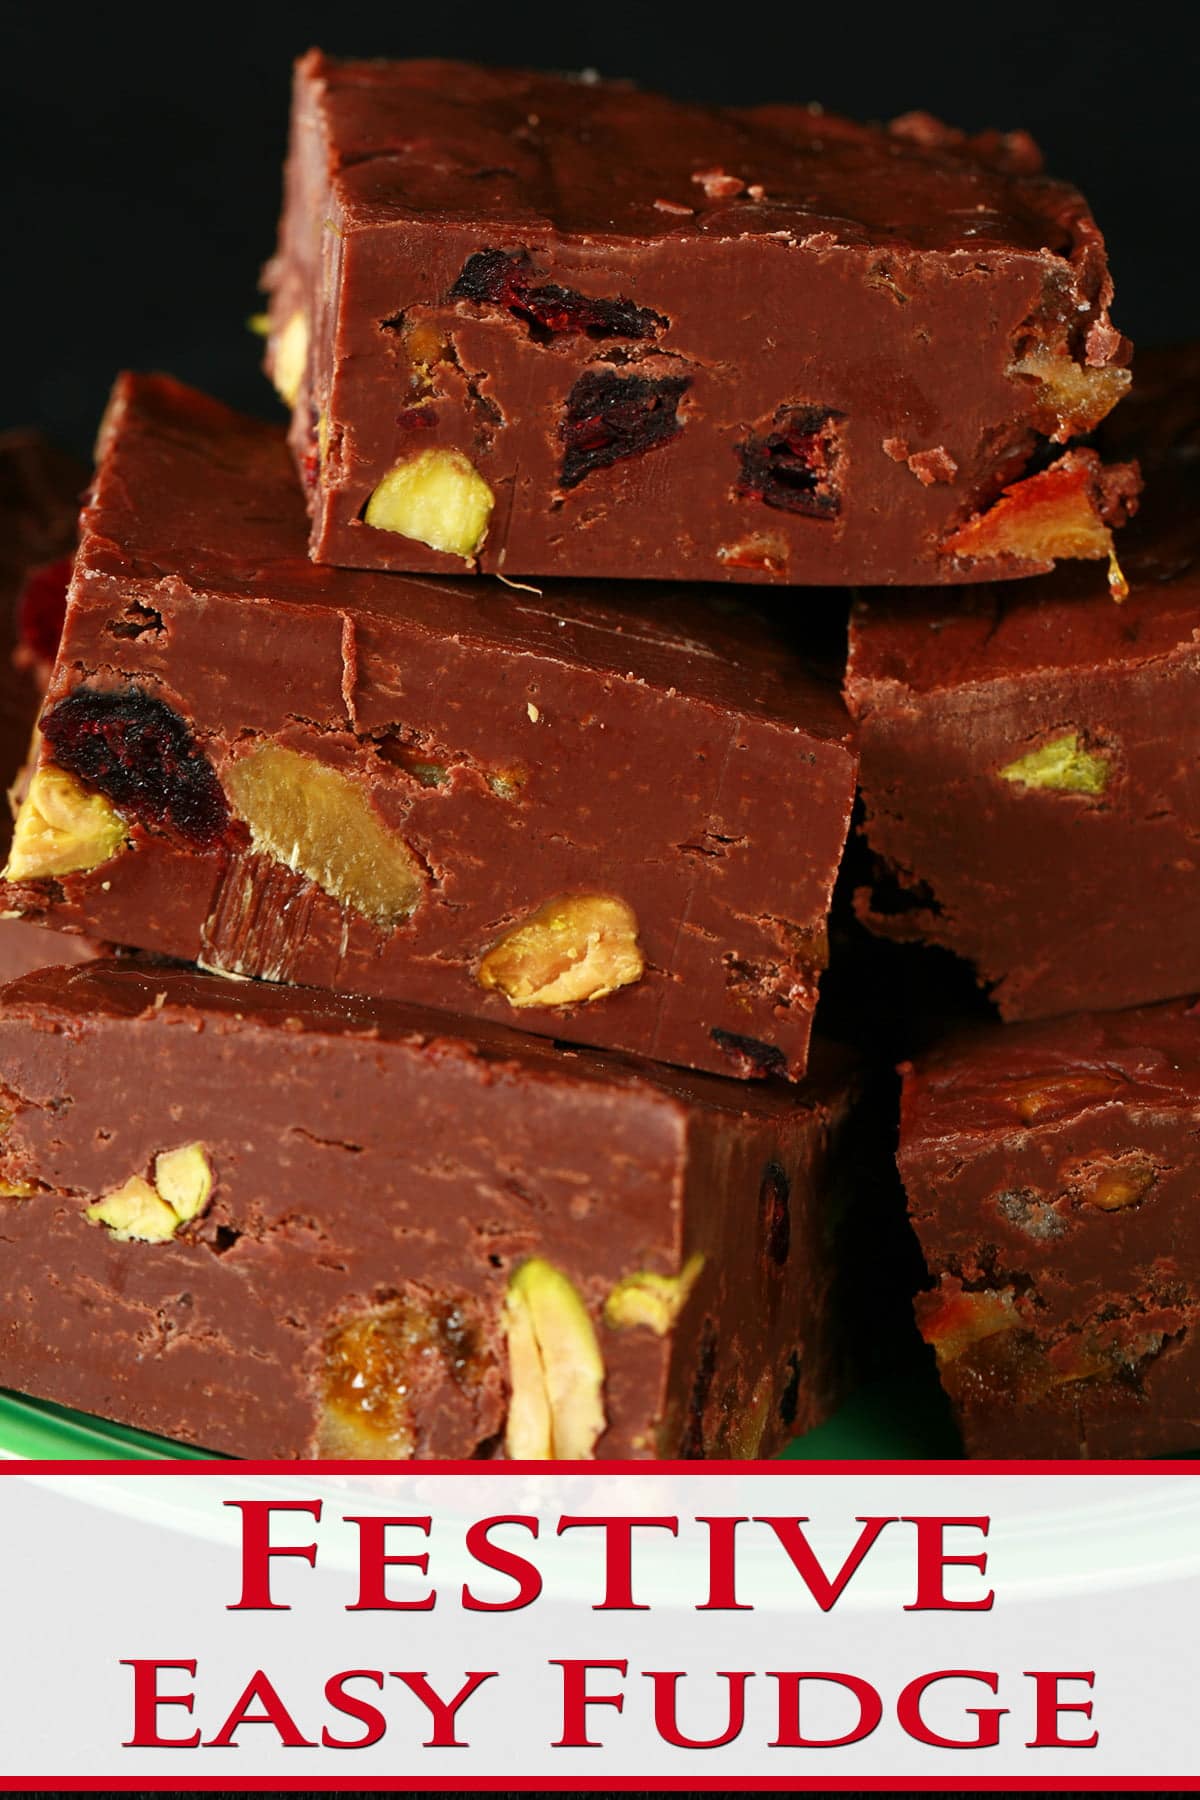 A green plate with a pile of chocolate fudge on it. Each square of fudge is studded with nuts, dried cranberries, candied orange peel, and candied ginger.